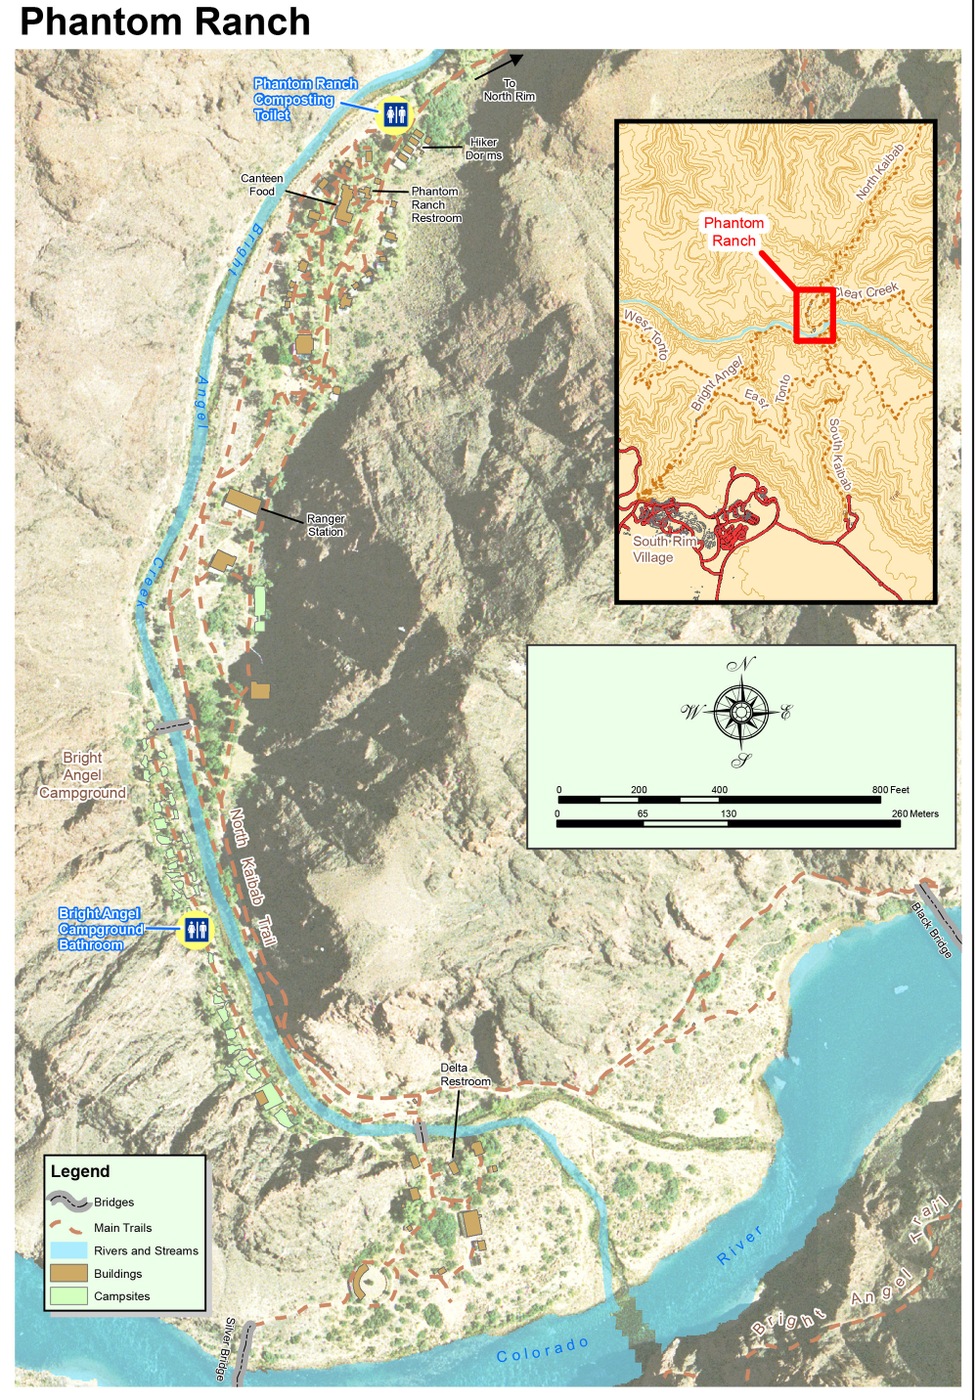 Map of Phantom Ranch area in the Grand Canyon showing locations of Phantom Ranch composting toilet and Bright Angel Campground bathroom. National Park Service photo